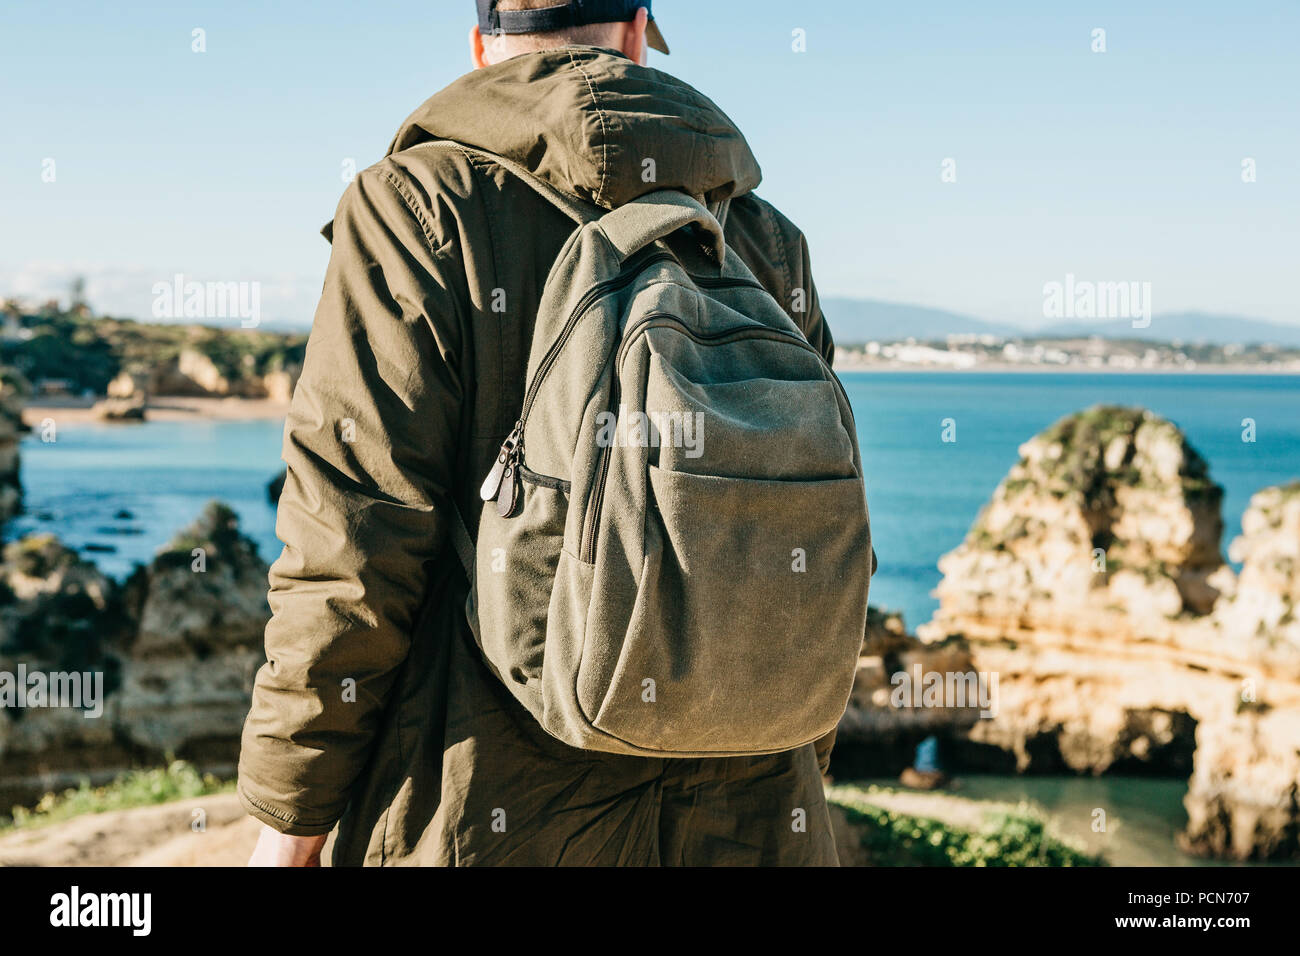 A tourist or traveler with a backpack admires the beautiful view of the Atlantic Ocean and the coast near the city called Lagos in Portugal. Stock Photo